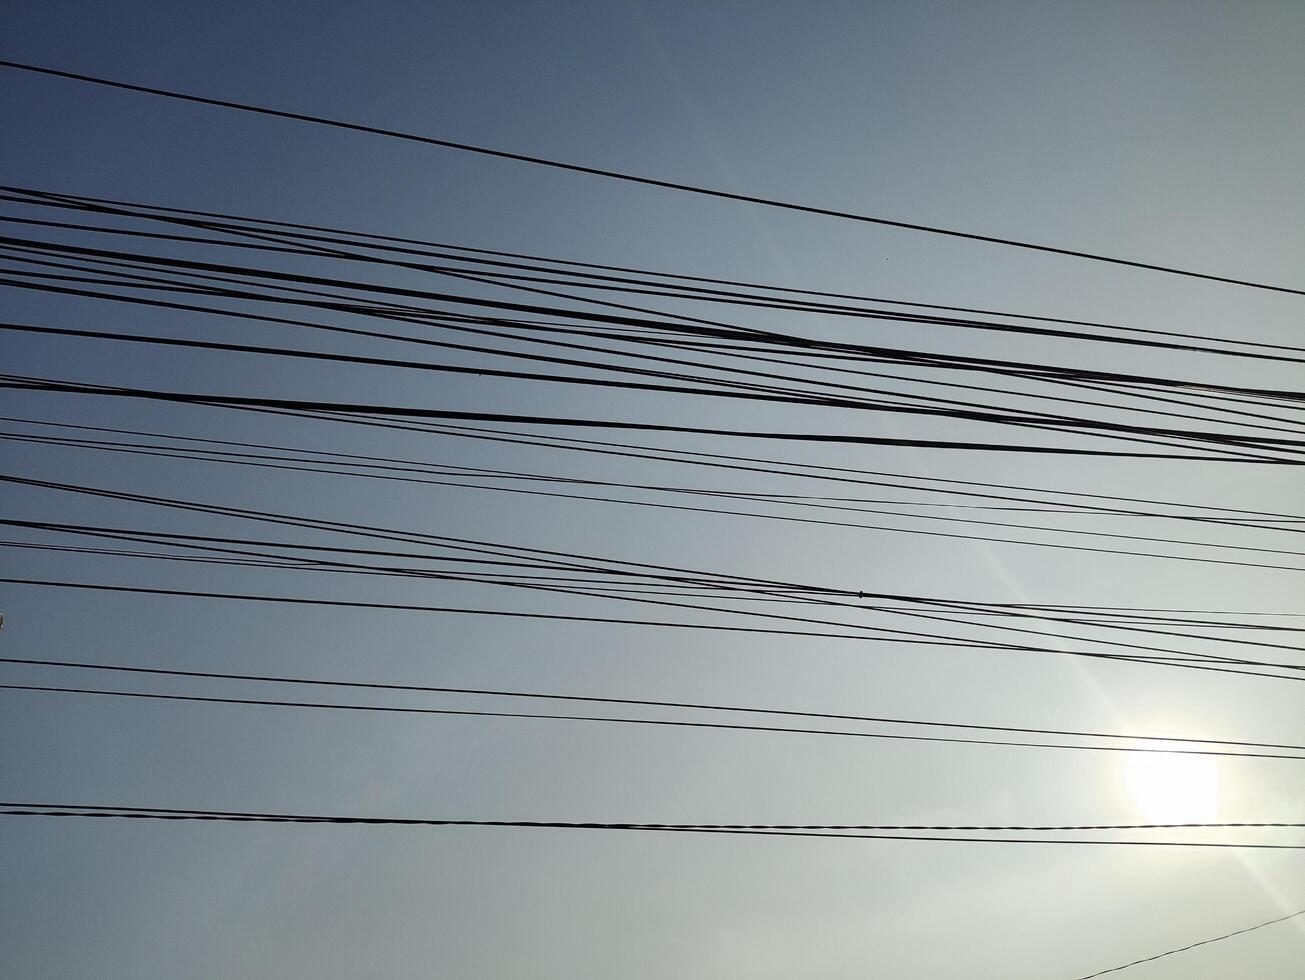 low angle view of cables against blue sky photo